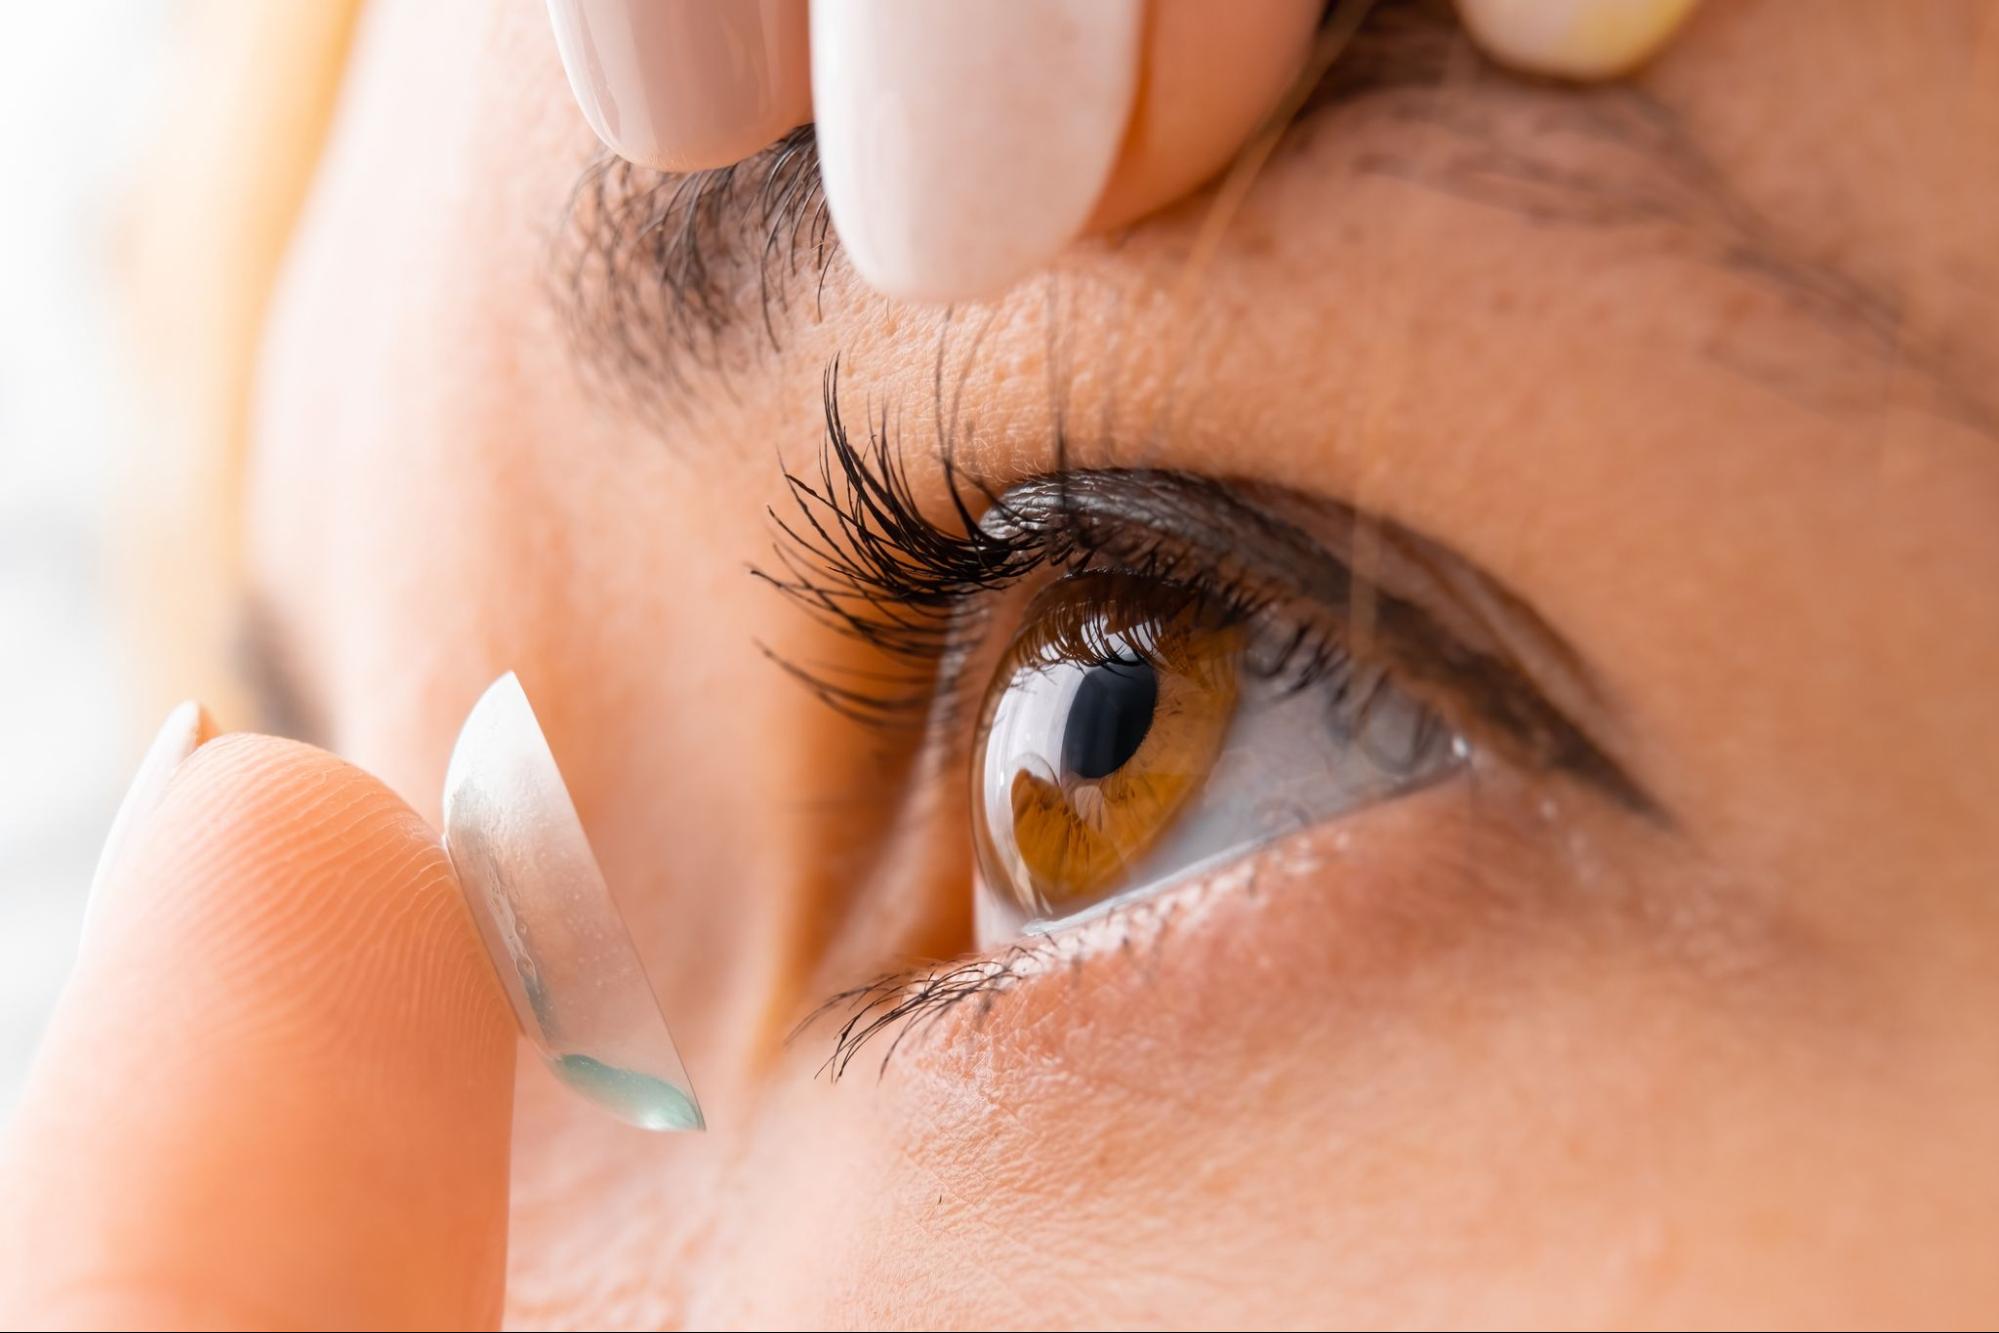 Discover the Advantages of Scleral Lenses for Managing Severe Dry Eye